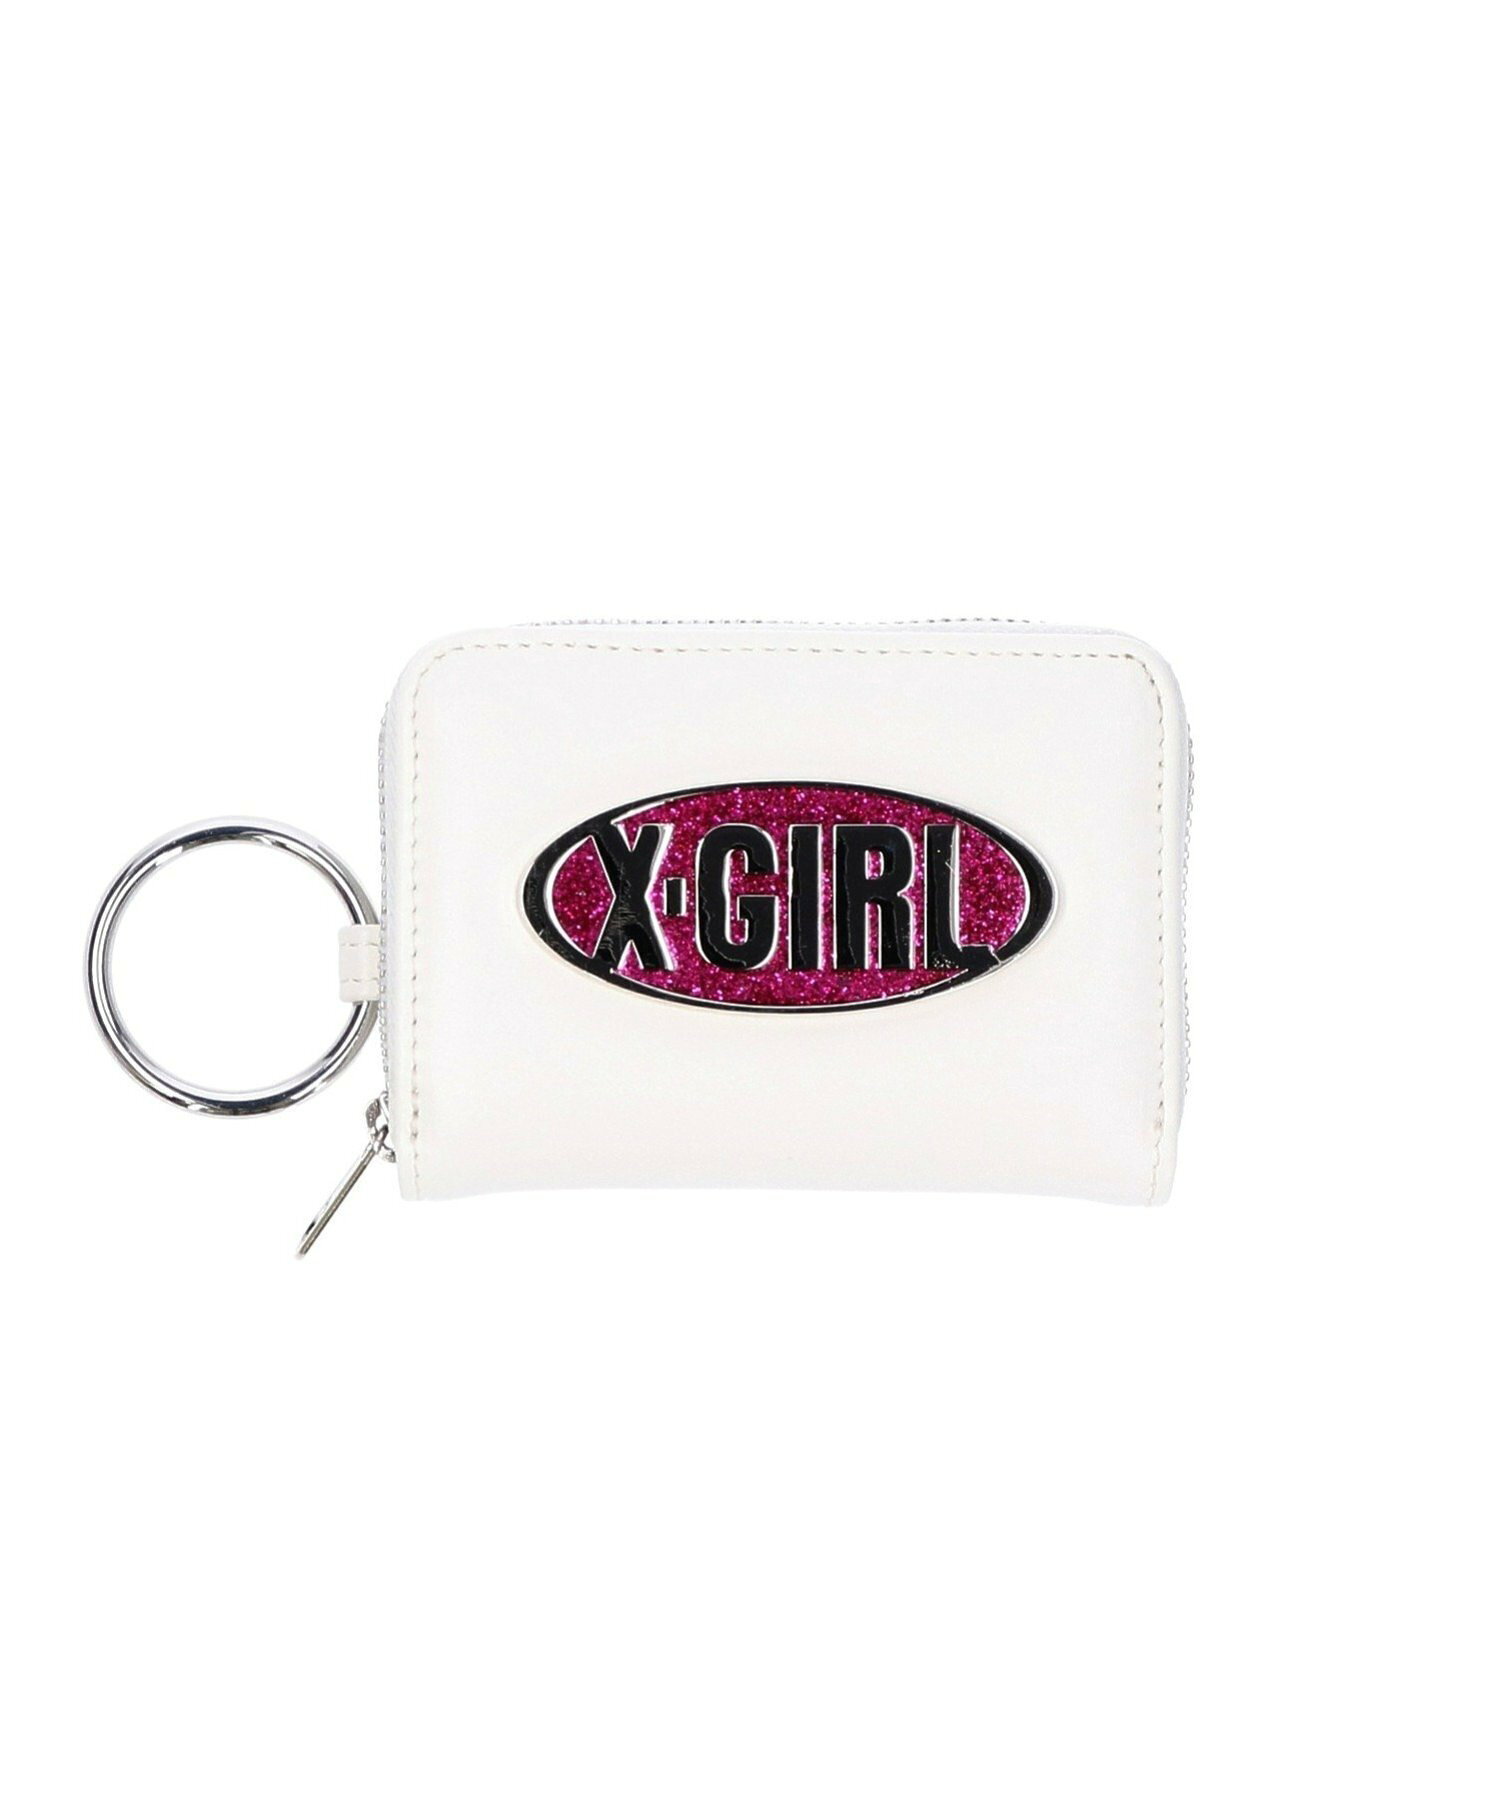 GLITTER OVAL LOGO COIN AND CARD CASE コインケース カードケース  X-girl 